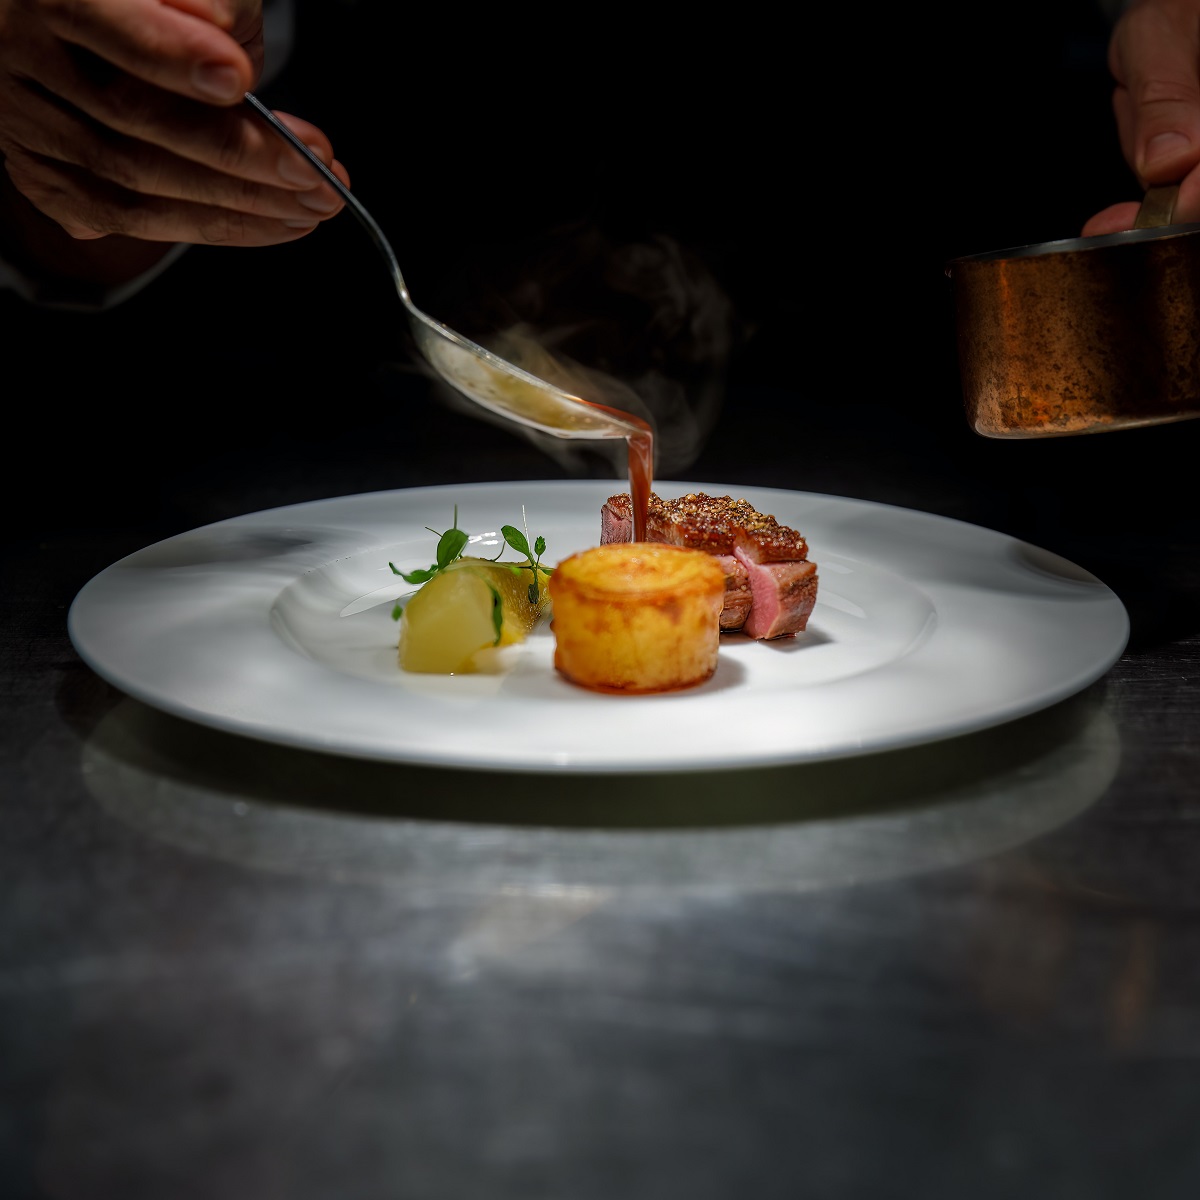 Chef plating a dish at a michelin starred restaurants in italy